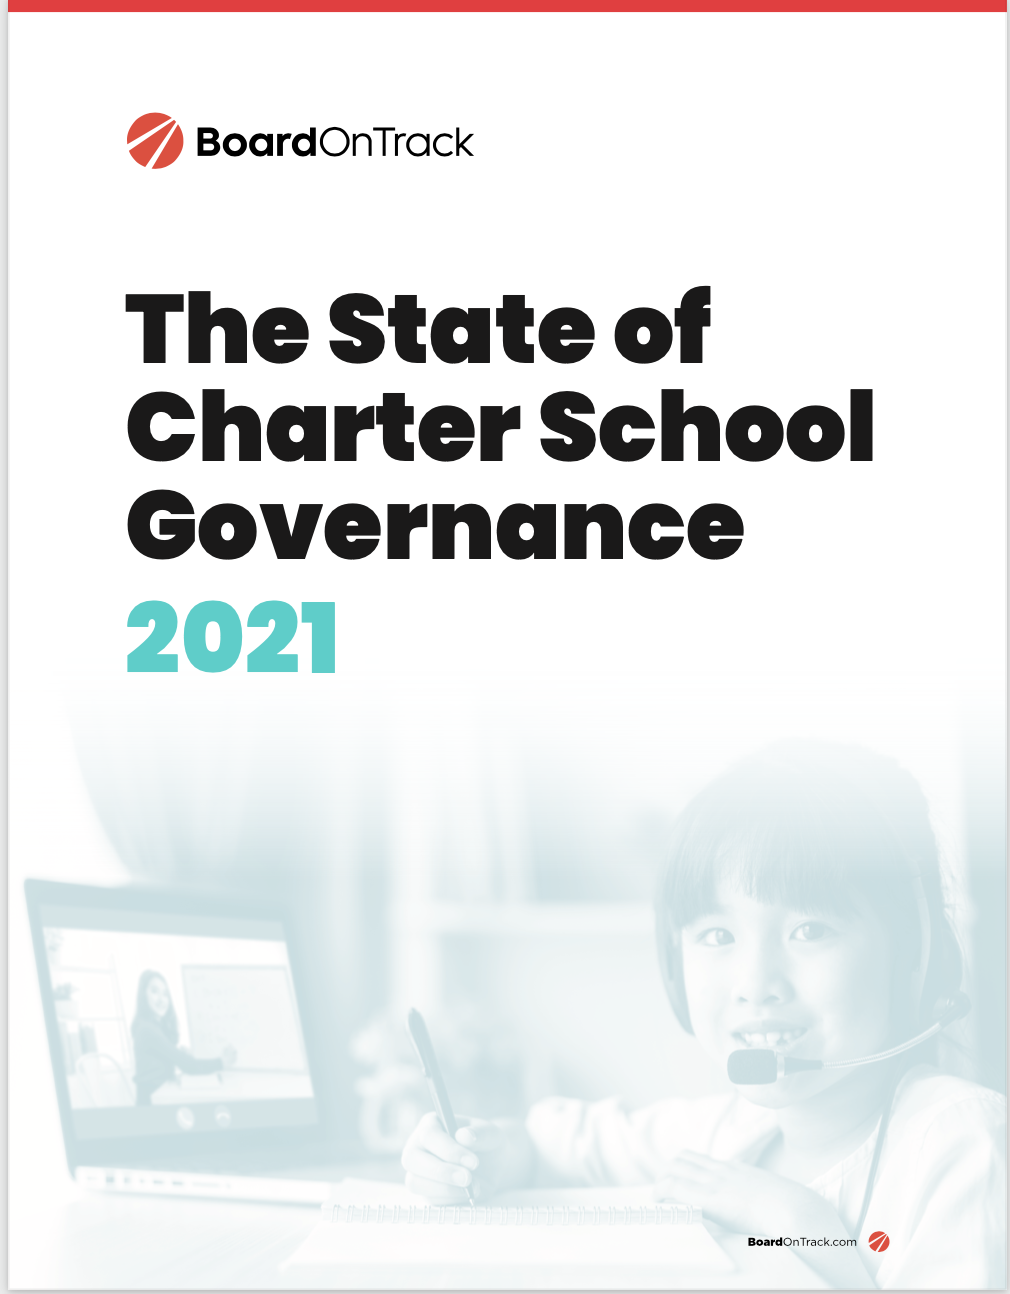 The State of Charter School Governance 2021